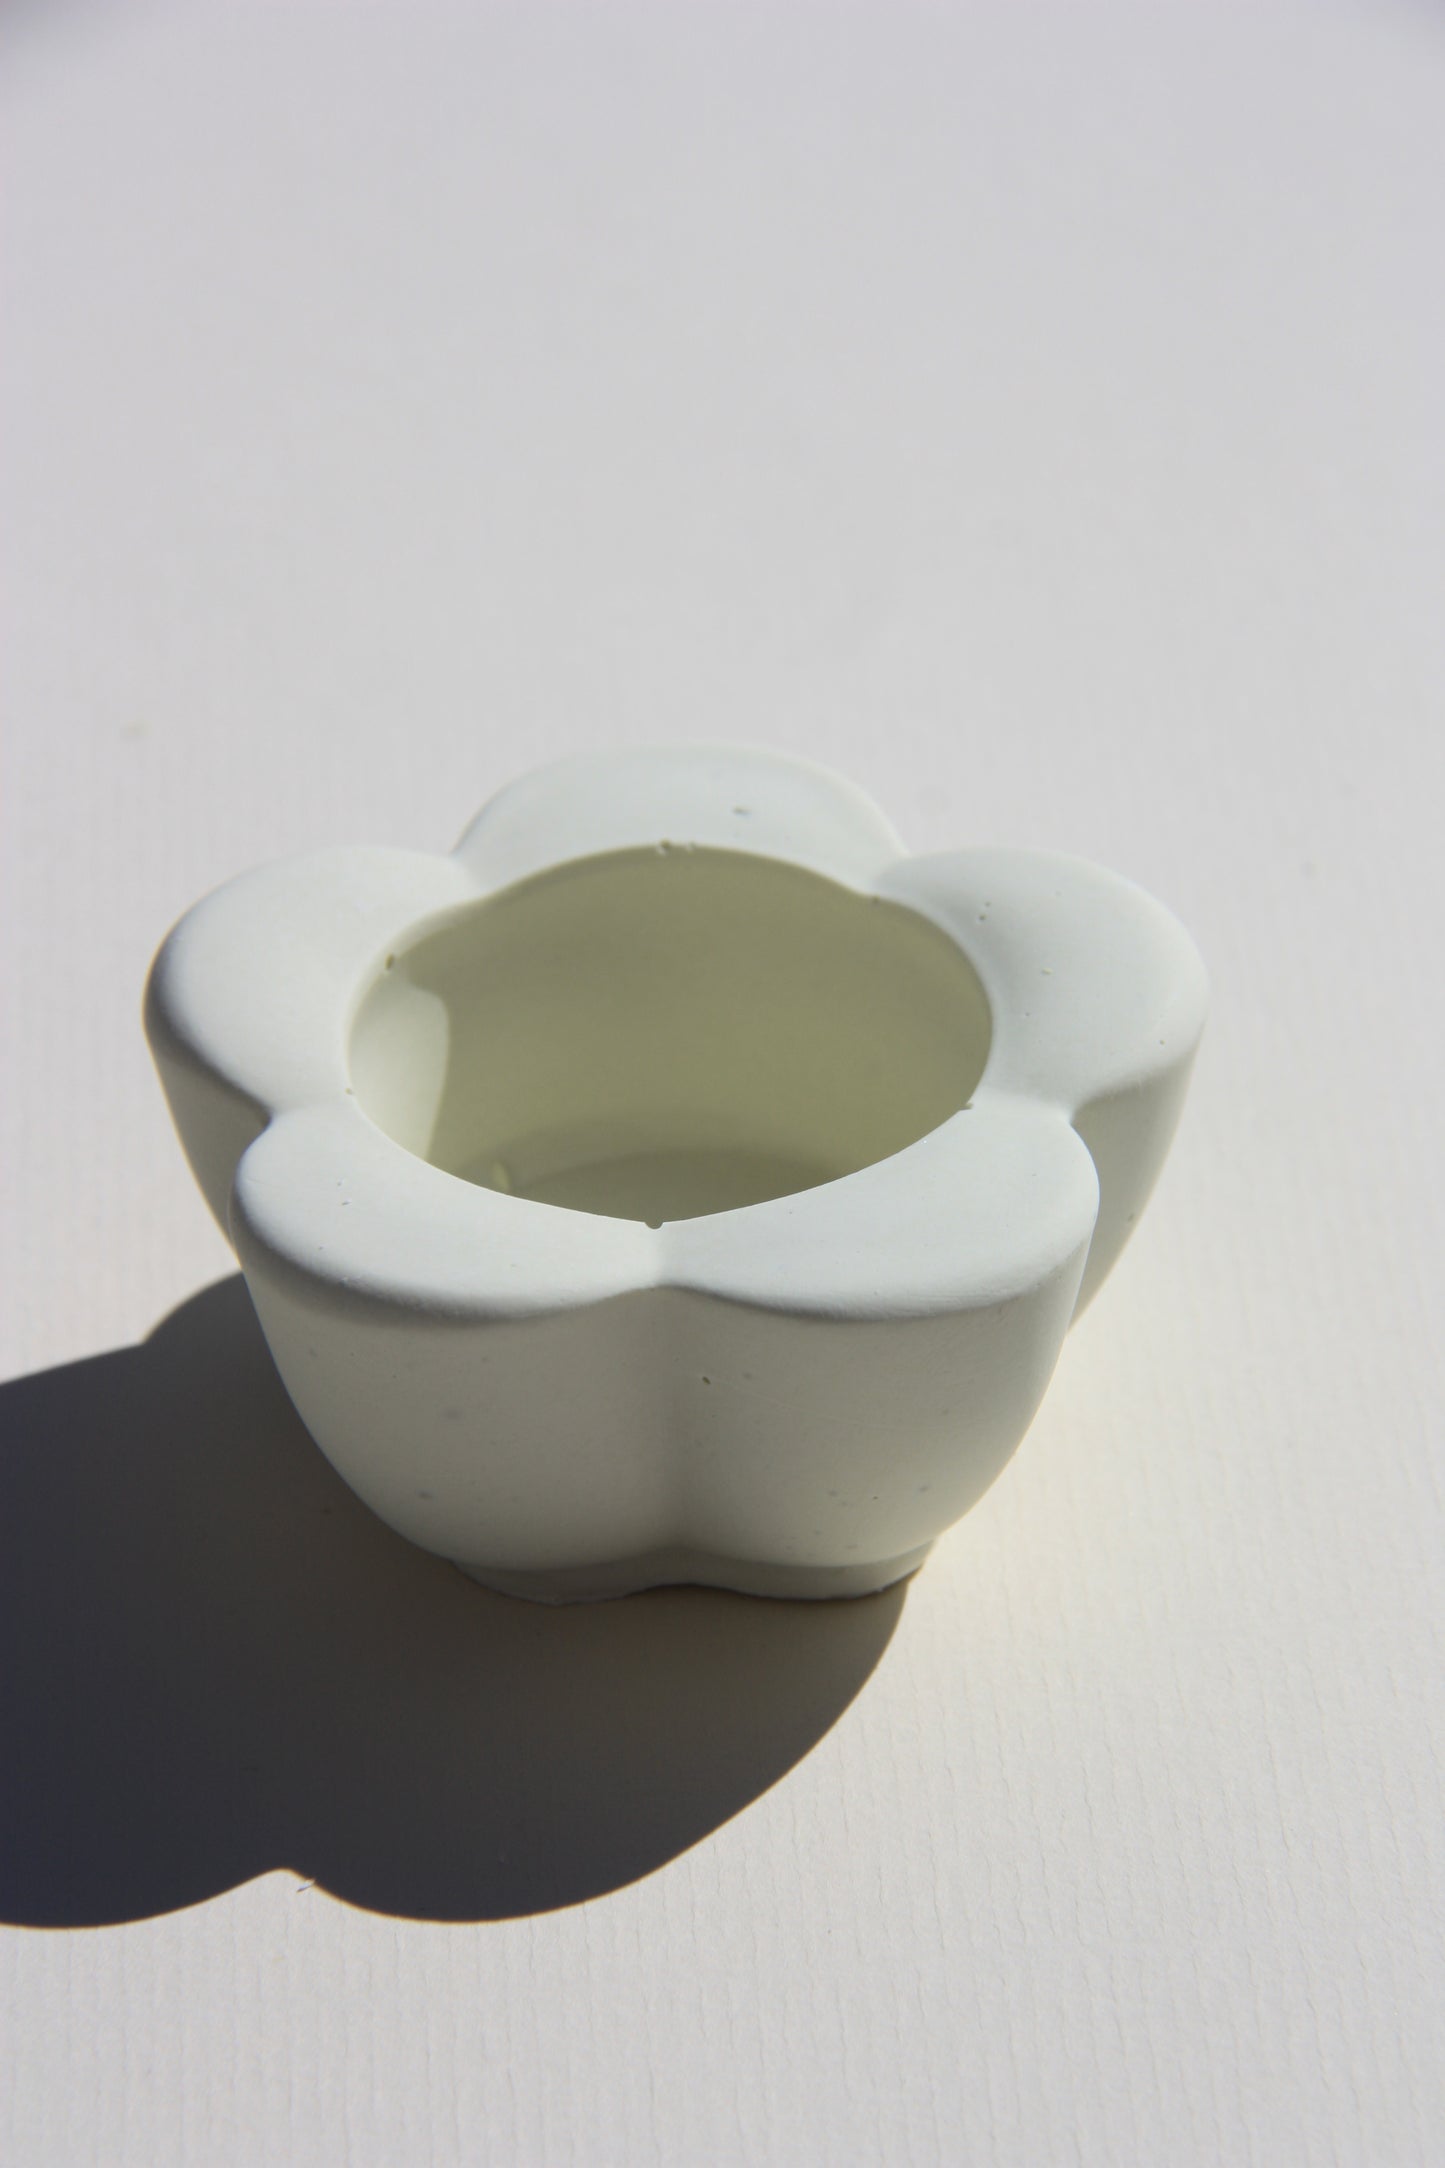 Flower waxine candle holder